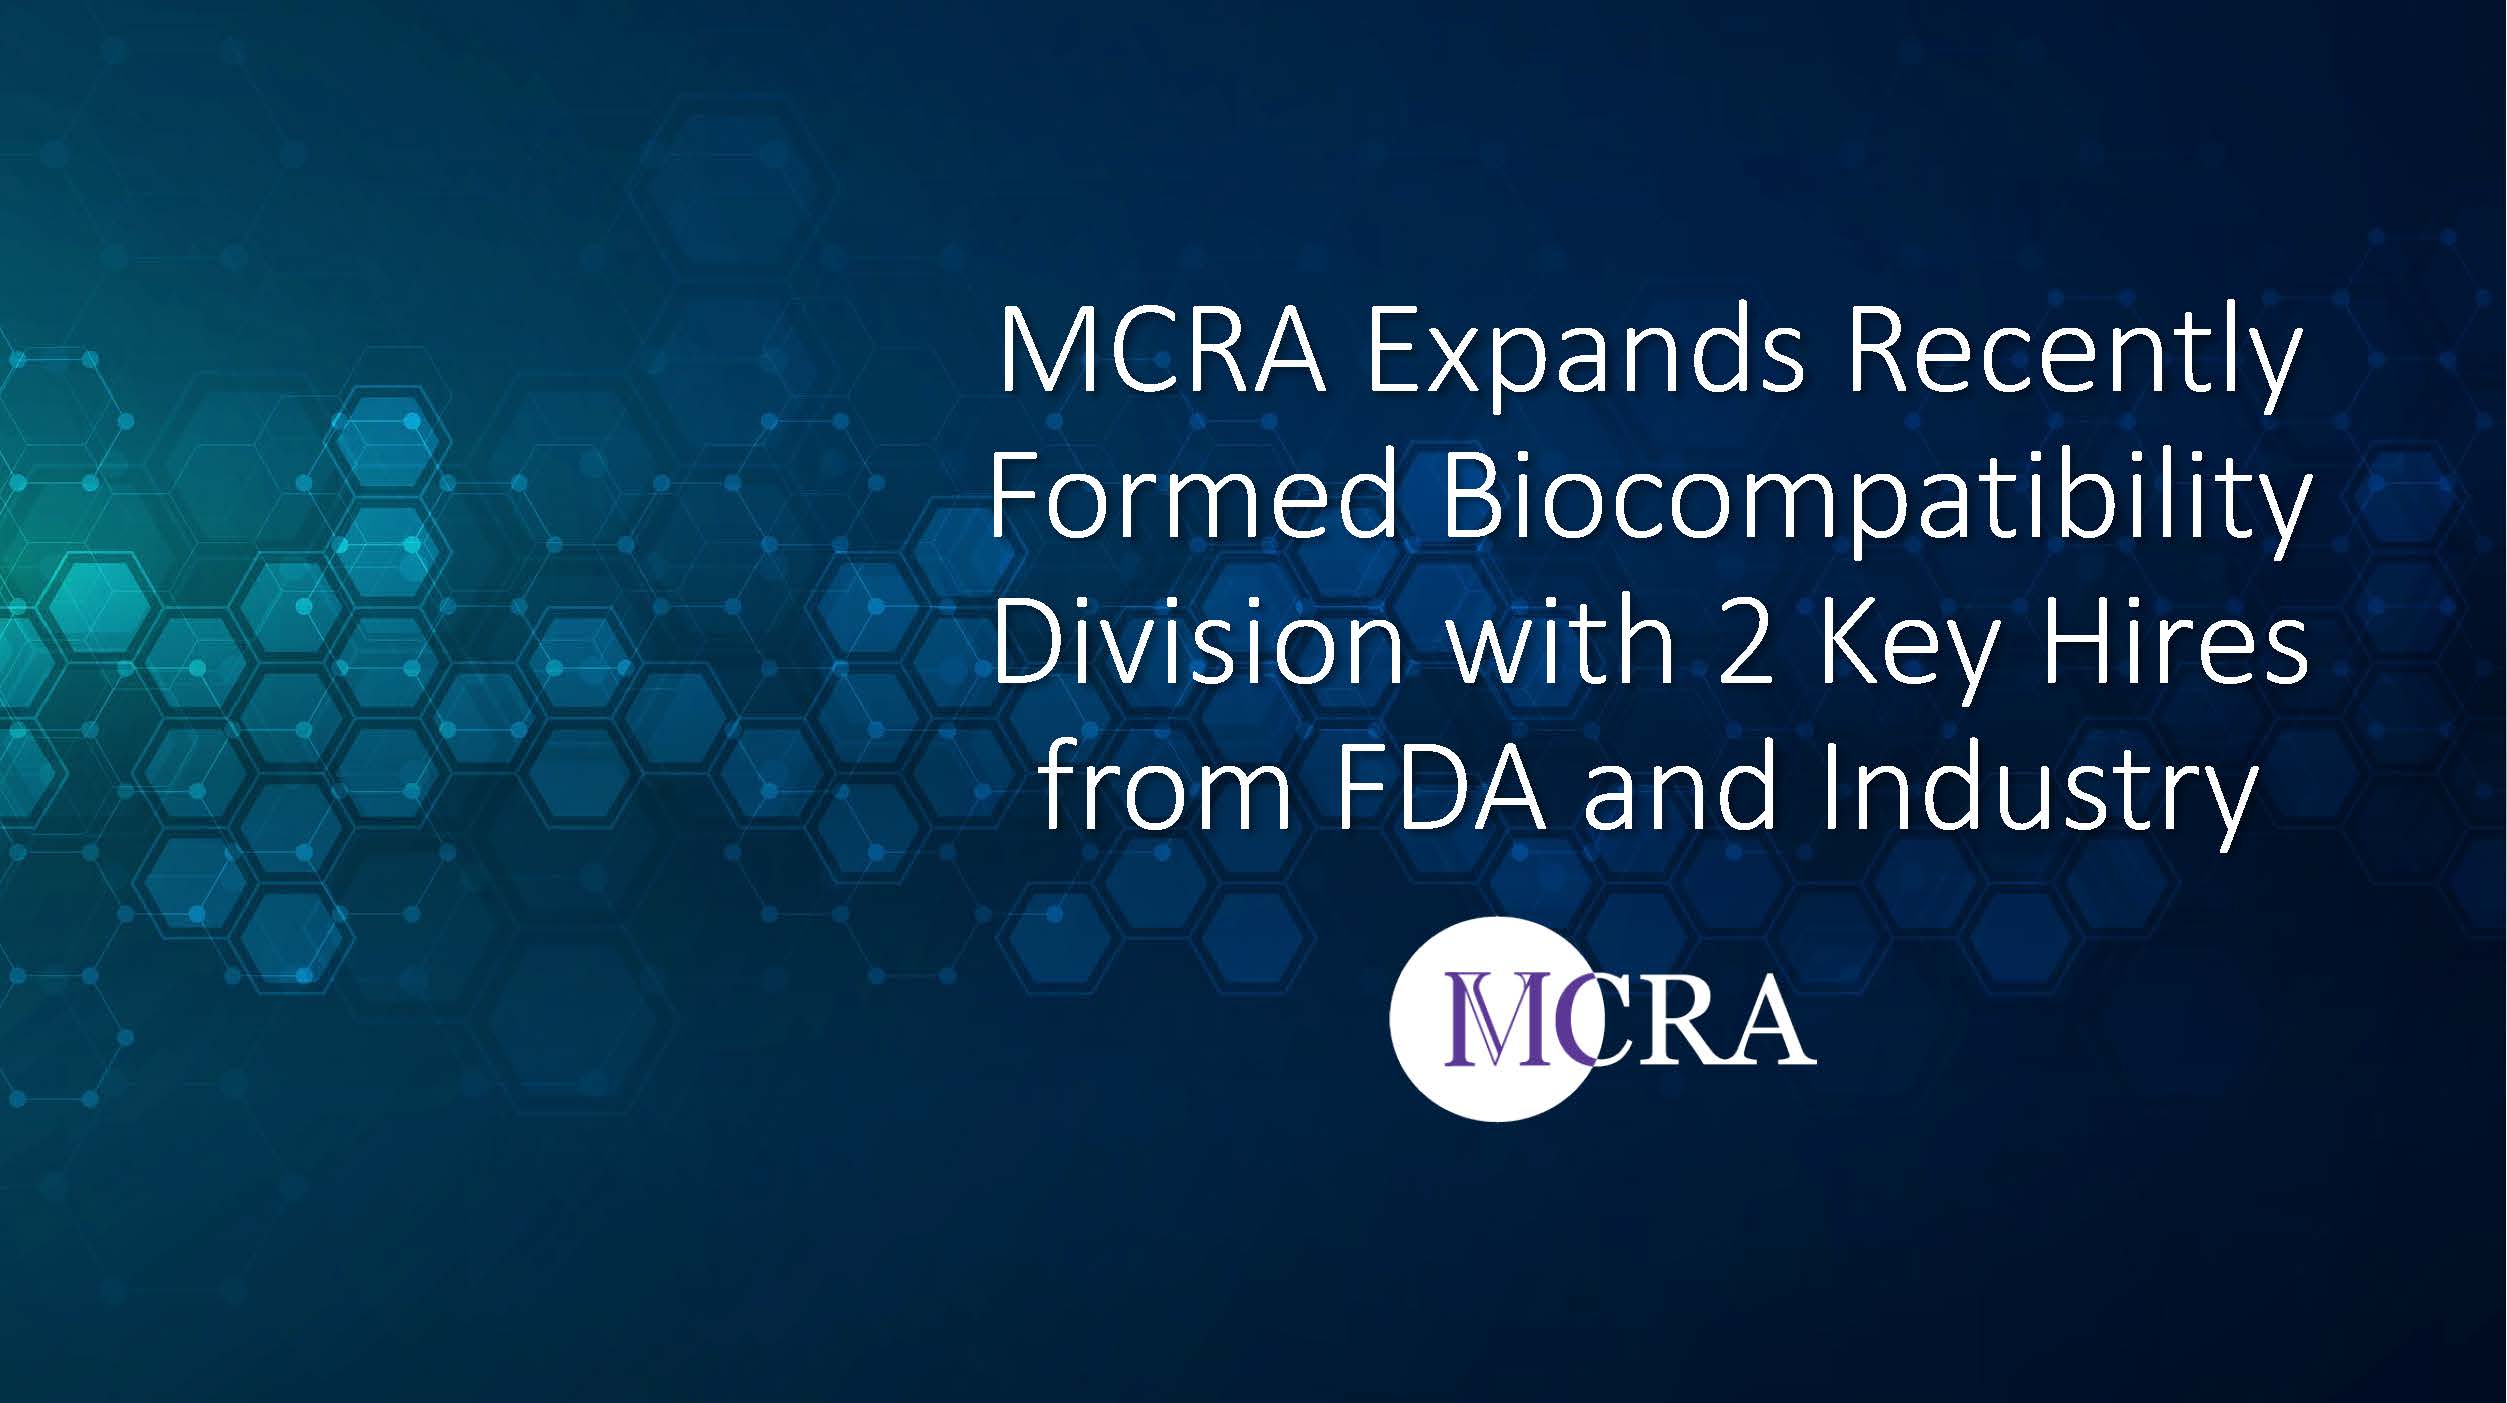 MCRA Expands Recently Formed Biocompatibility Division with 2 Key Hires from FDA and Industry